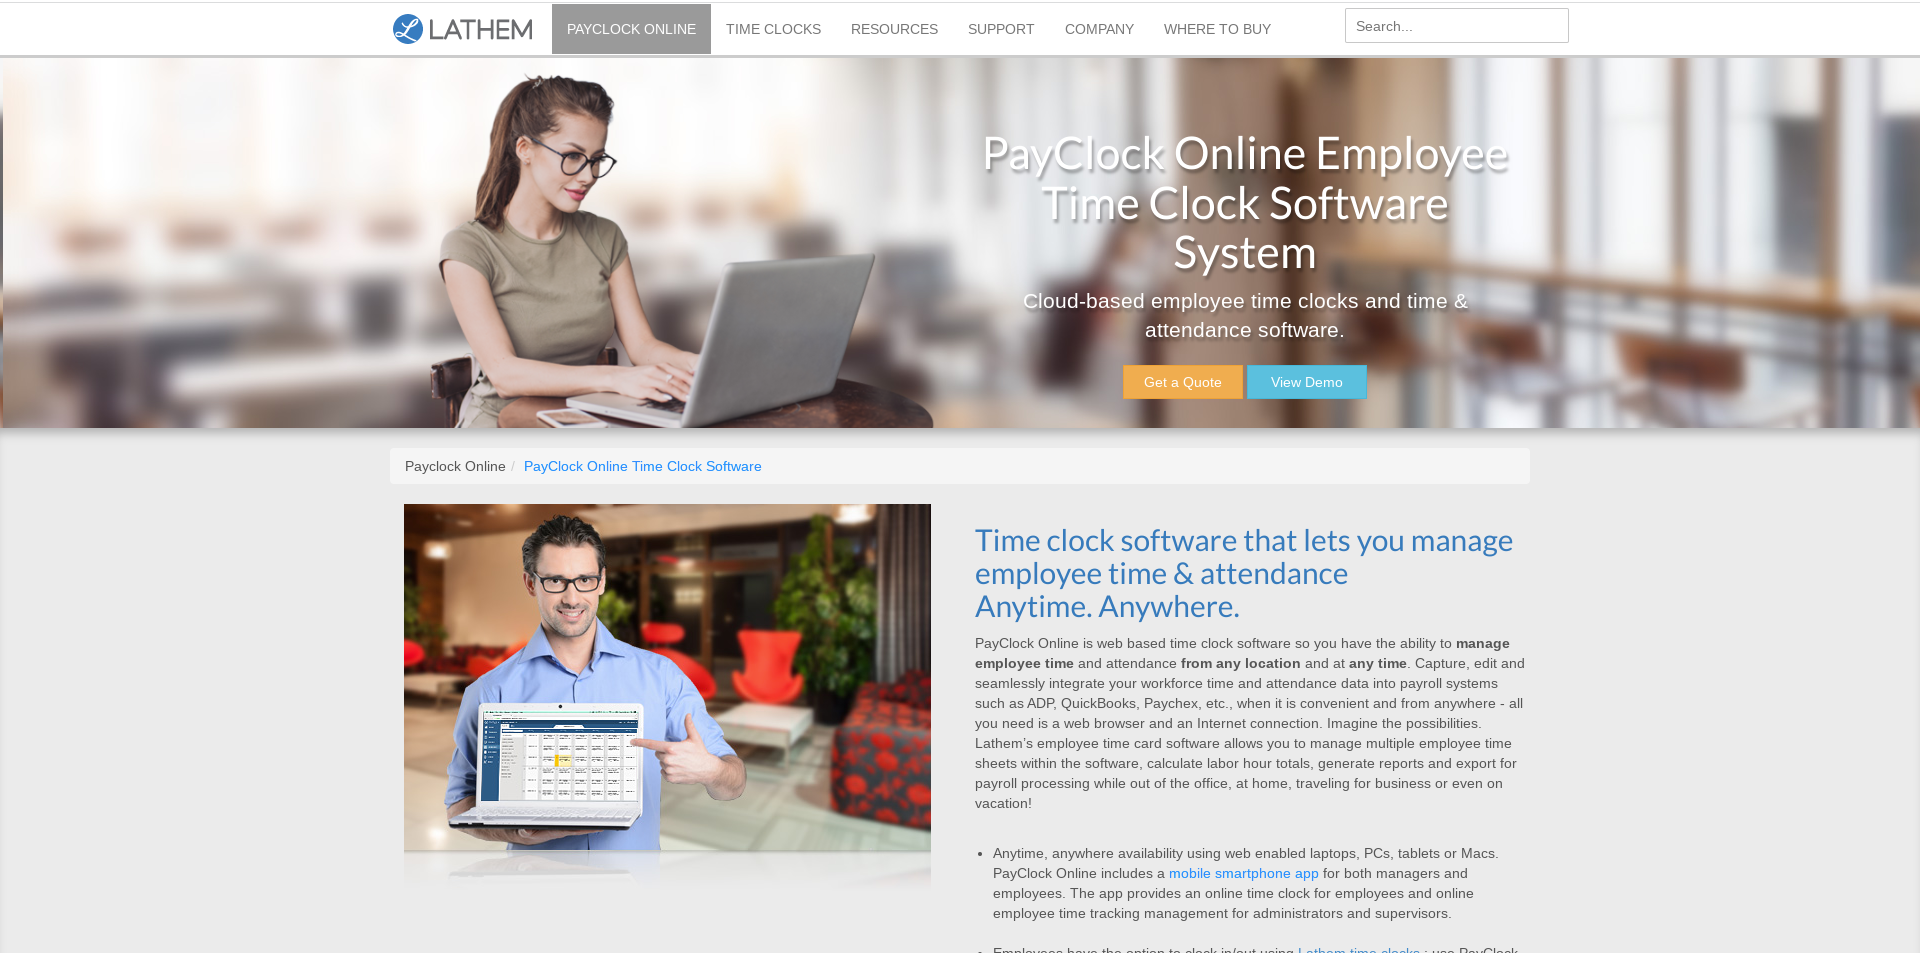 Lathem - employee time clocks for small business